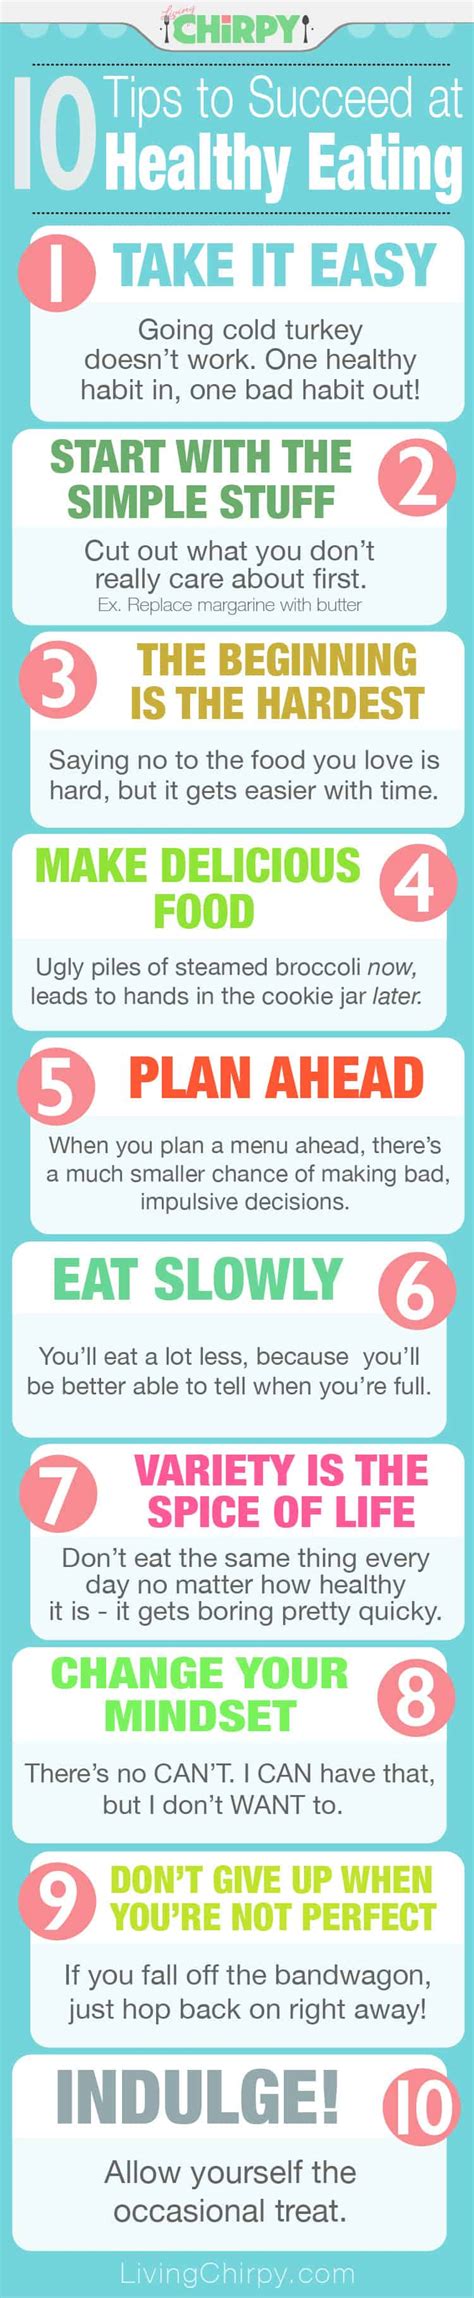 10 Tips To Succeed At Healthy Eating Living Chirpy